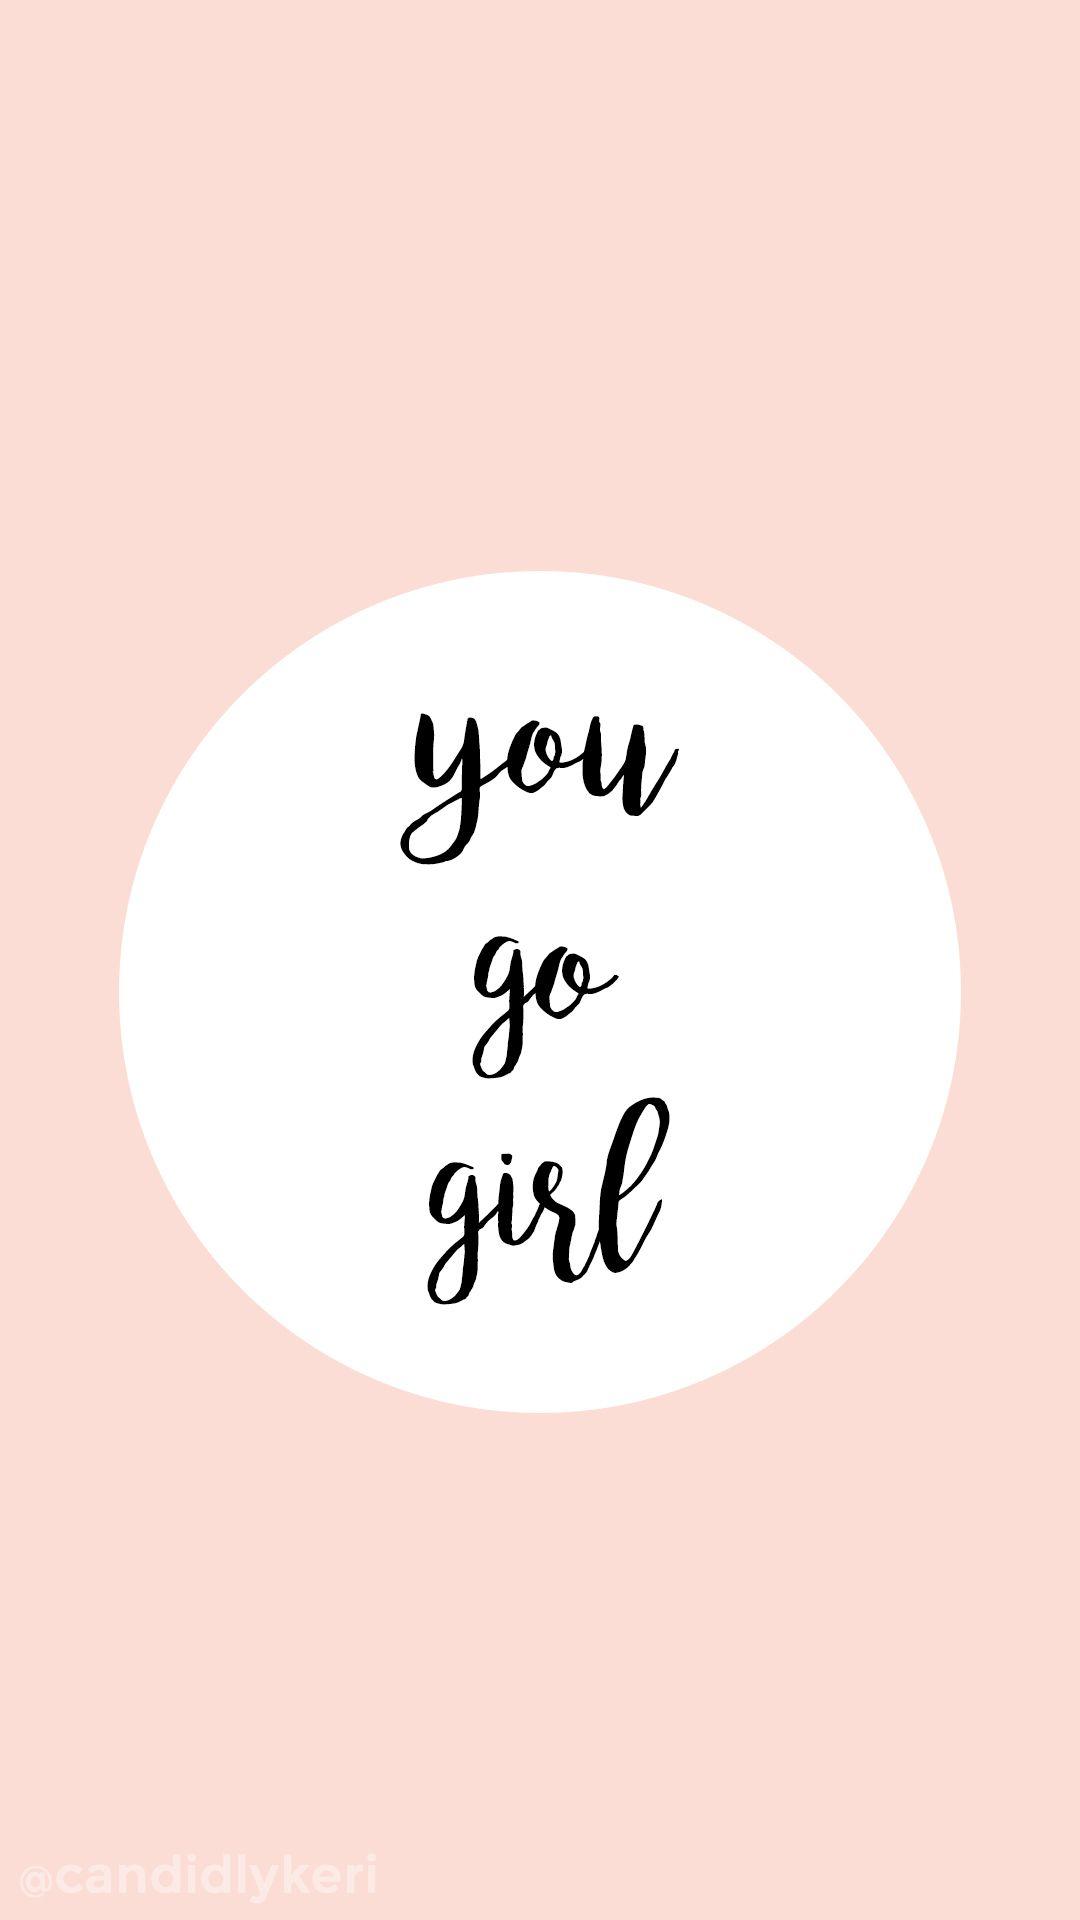 You Go Girl Pink quote inspirational background wallpaper you can download for free on the. Girl iphone wallpaper, Inspirational background, Quote background